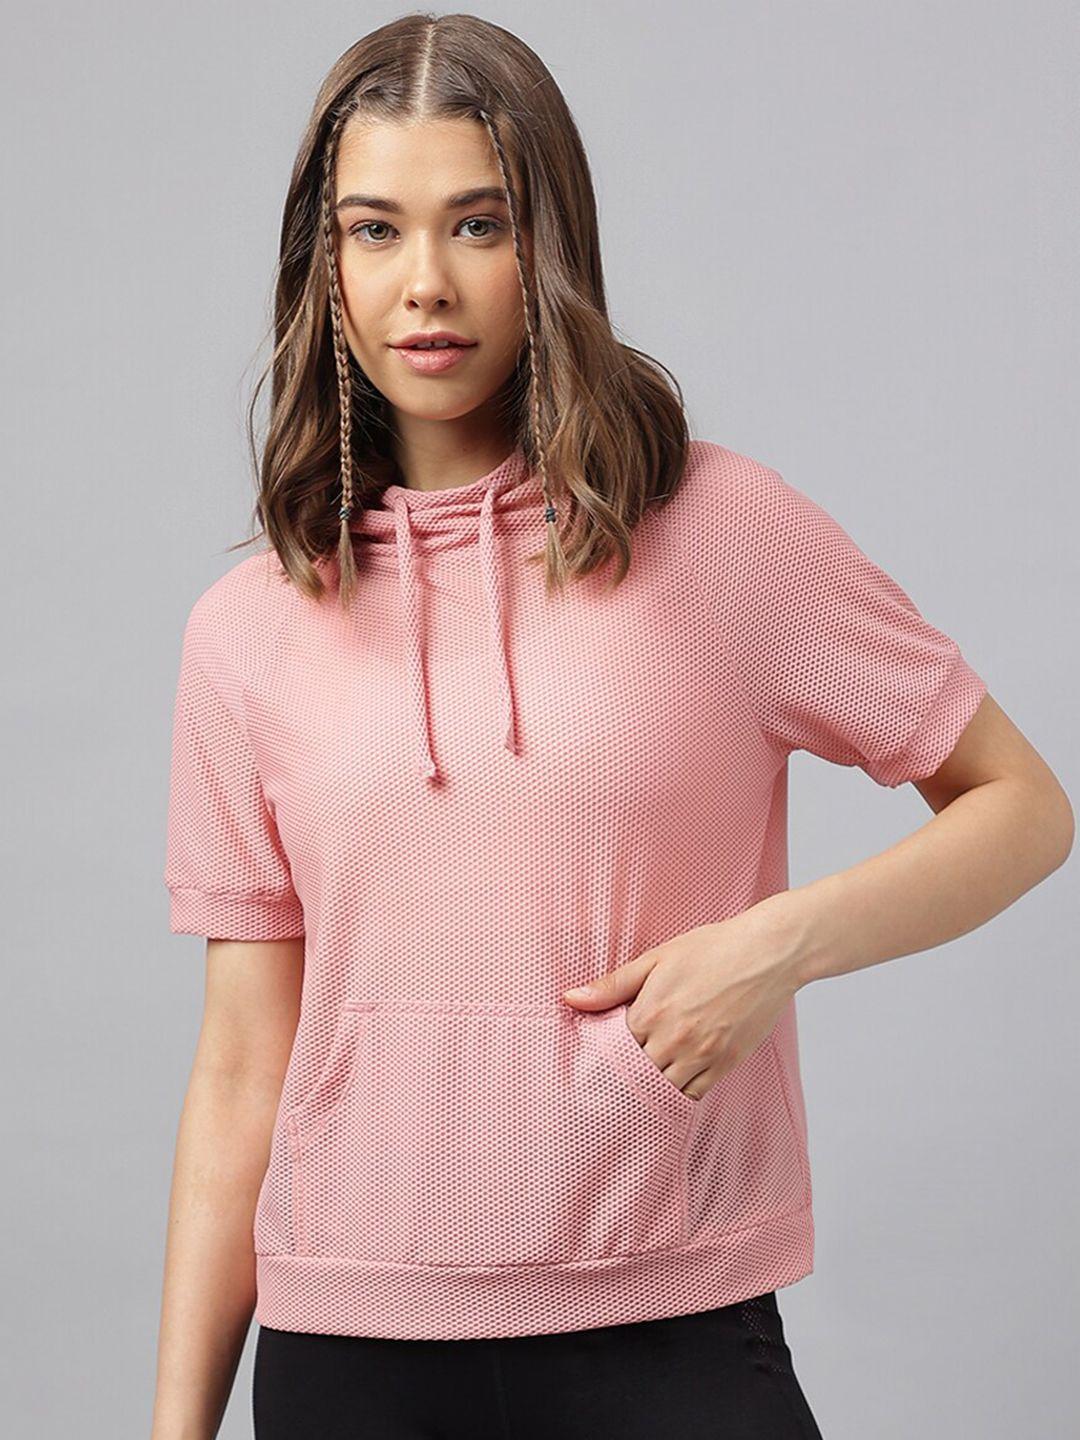 fitkin pink top